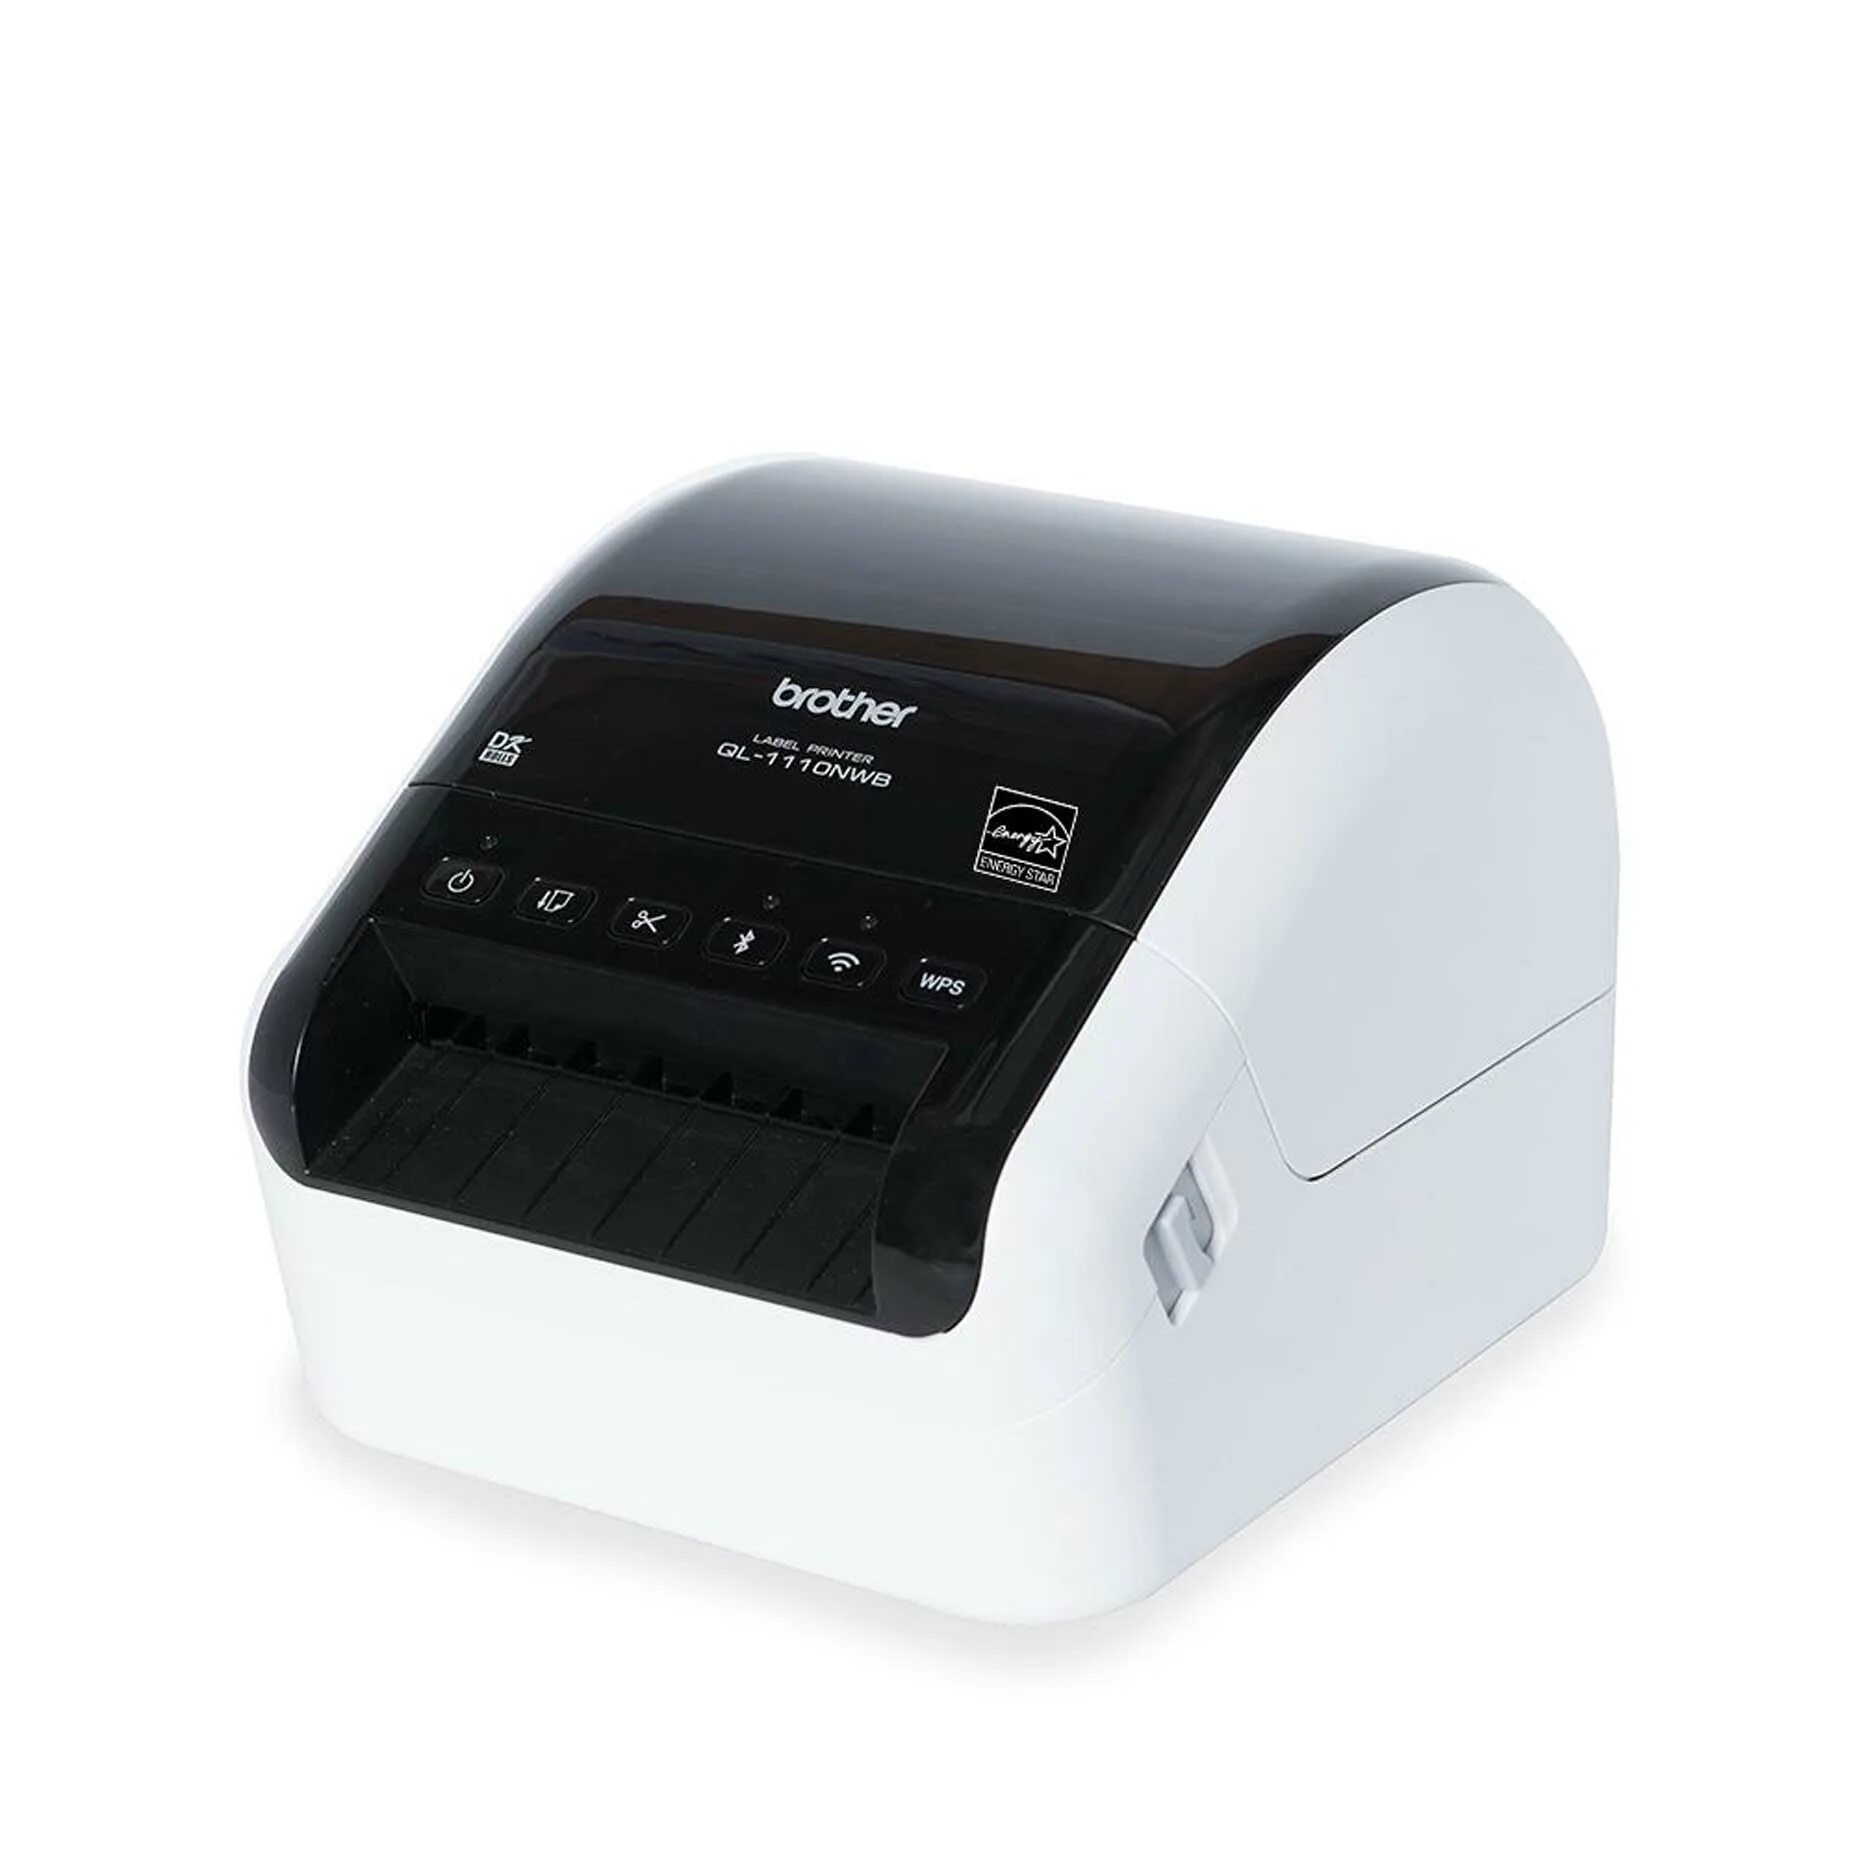 Brother 1100 принтер. Jiacheng 1100 драйвера. Brother Label maker with auto Cutter.